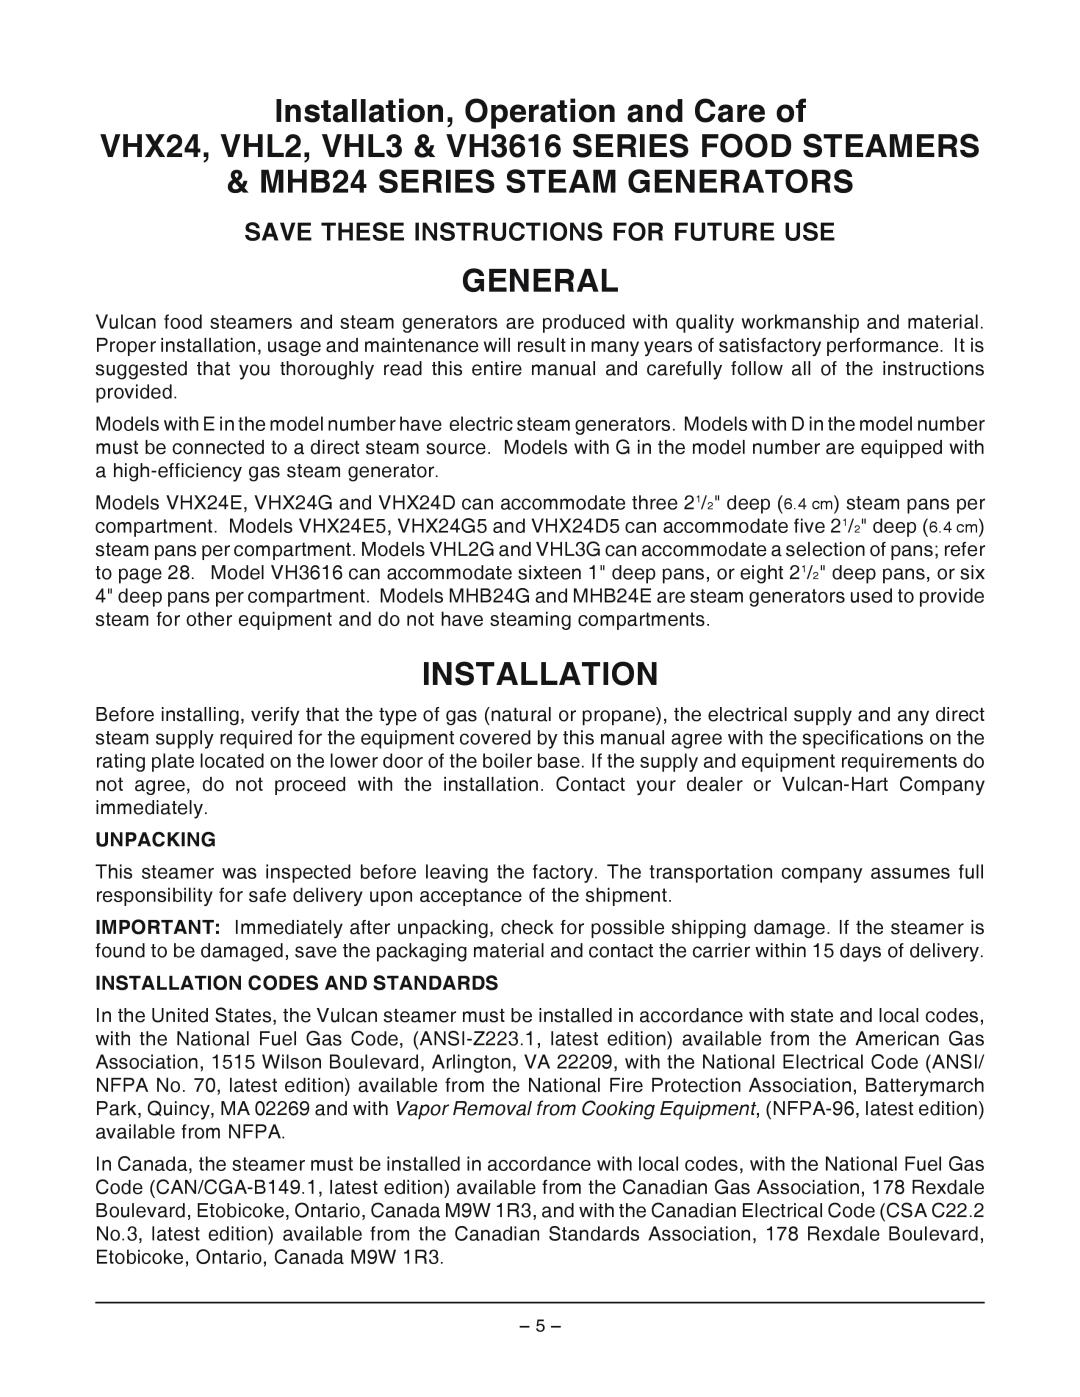 Vulcan-Hart VHL2G Installation, Operation and Care of, VHX24, VHL2, VHL3 & VH3616 SERIES FOOD STEAMERS, General, Unpacking 